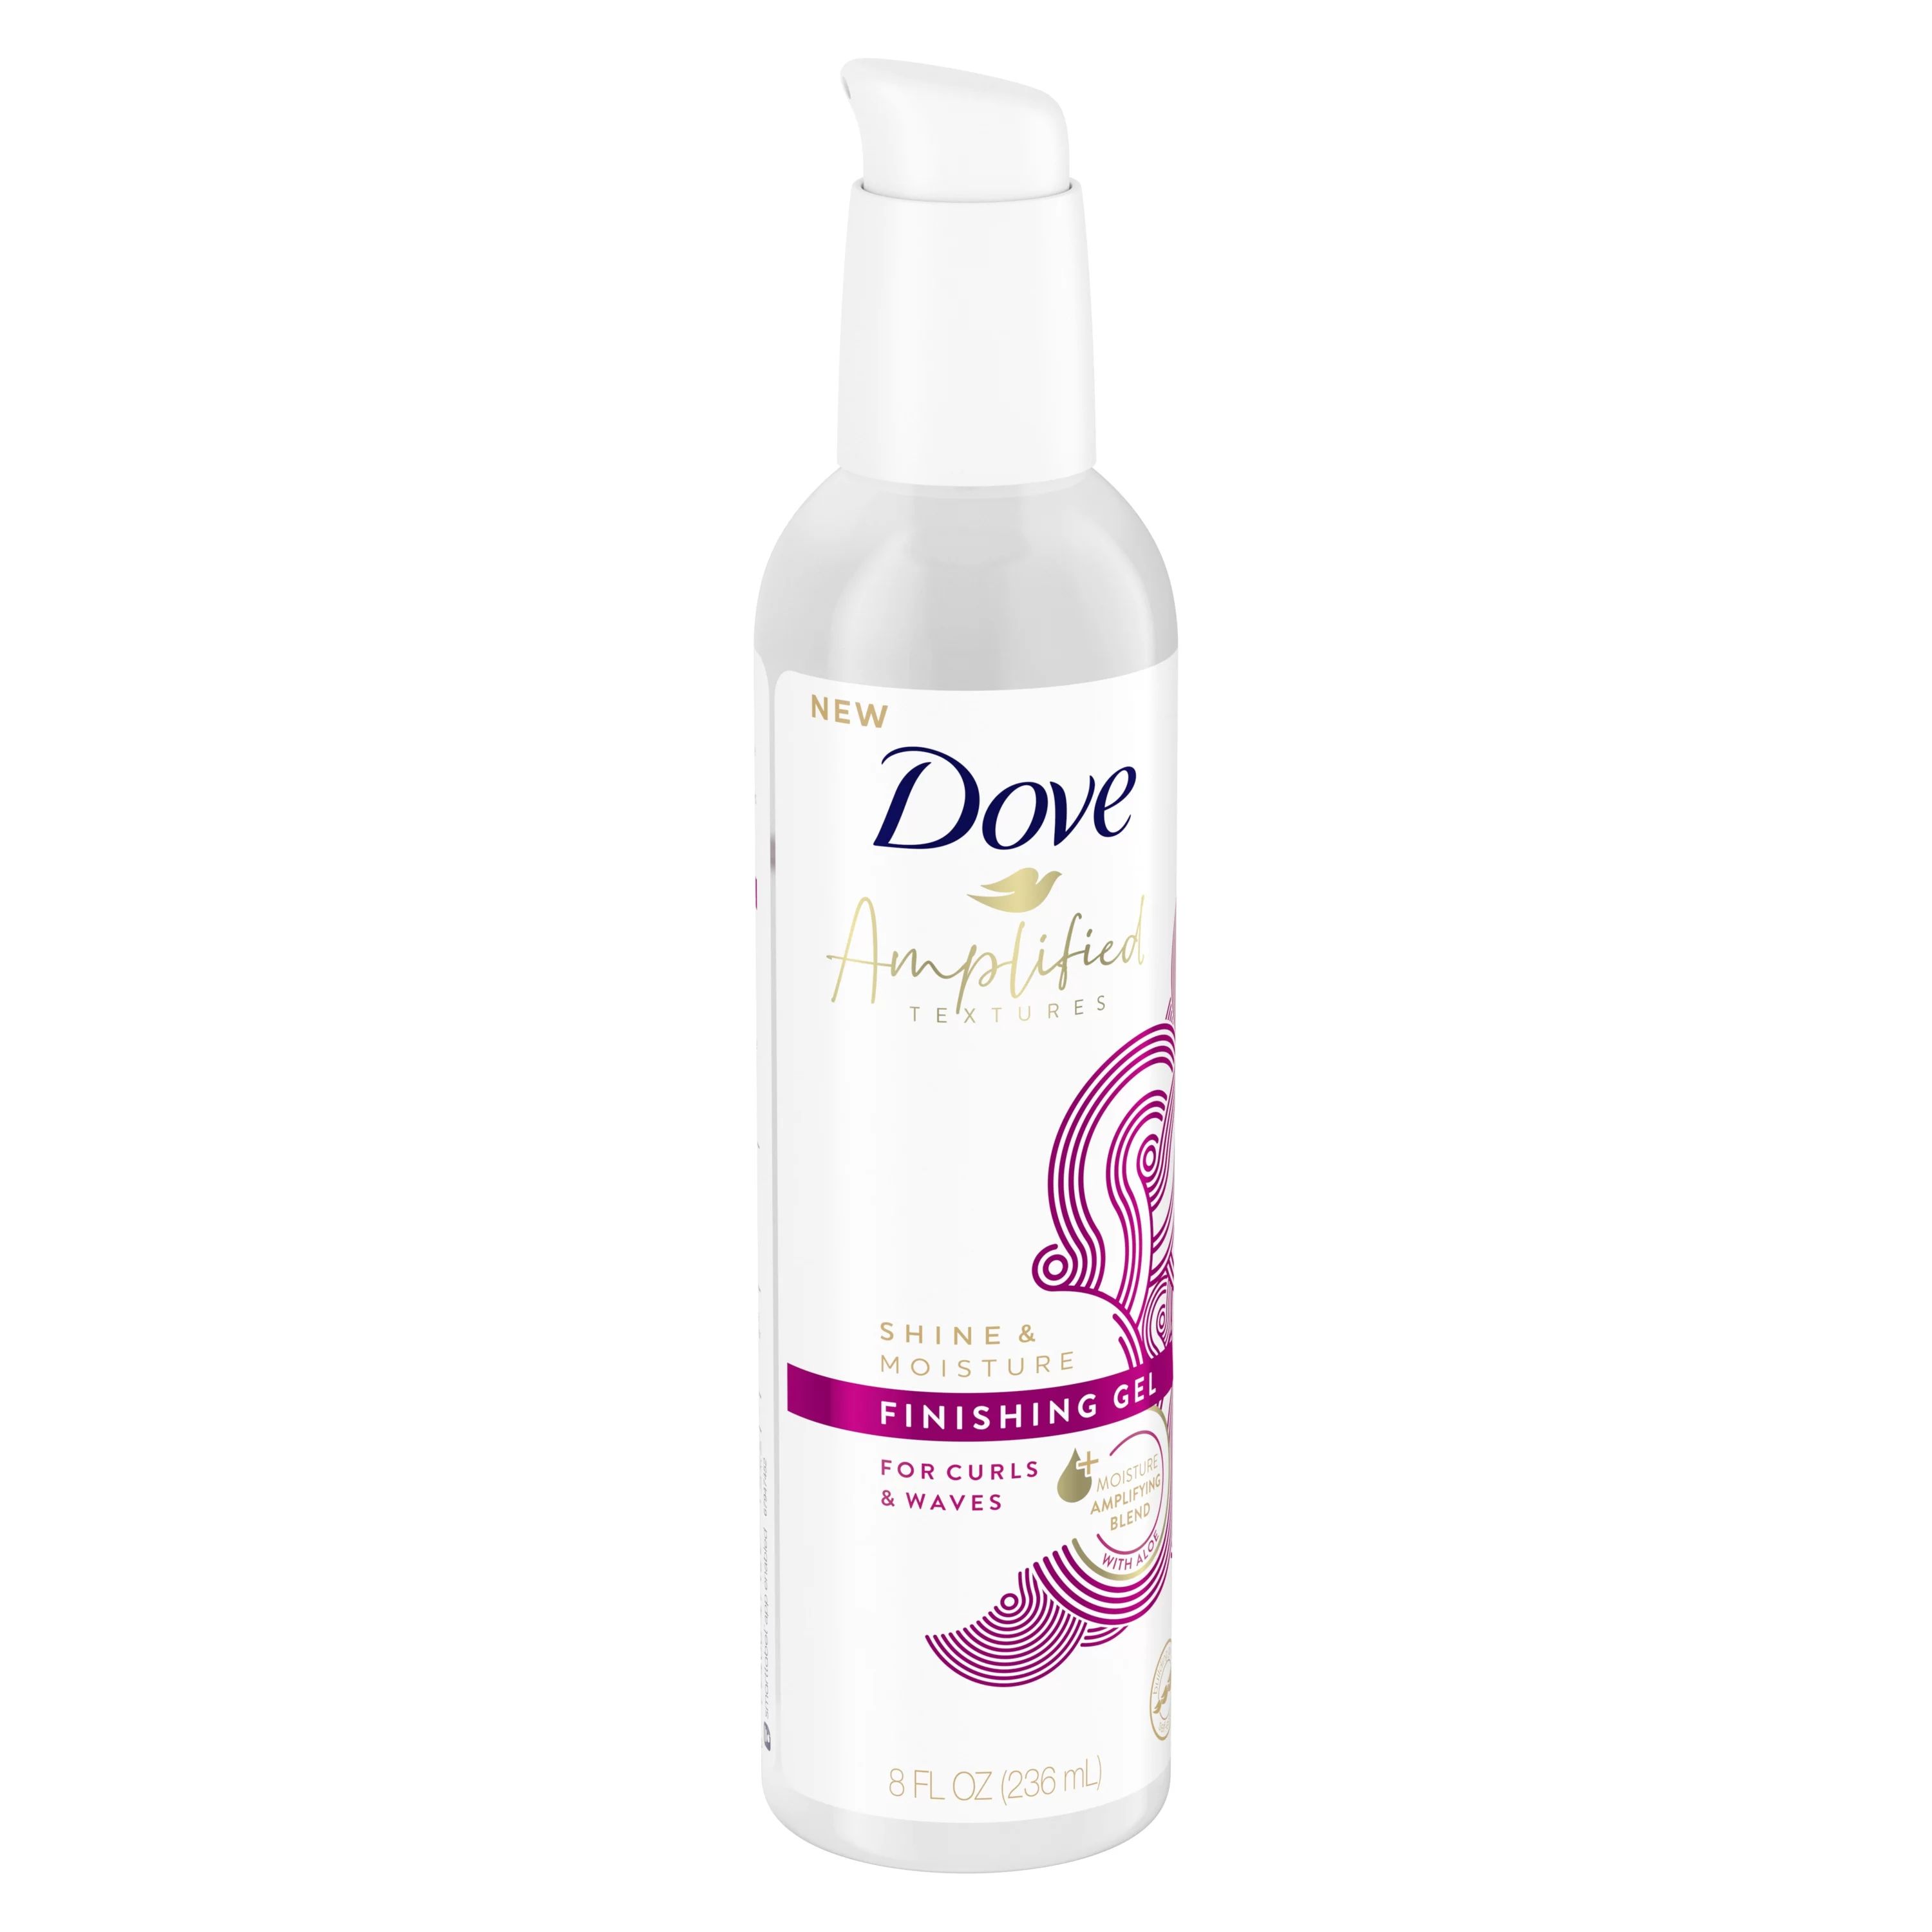 Dove Finishing Hair Gel, Amplified Textures, Frizz Control, with Aloe for Curly, Wavy Hair, 8 oz | Walmart (US)